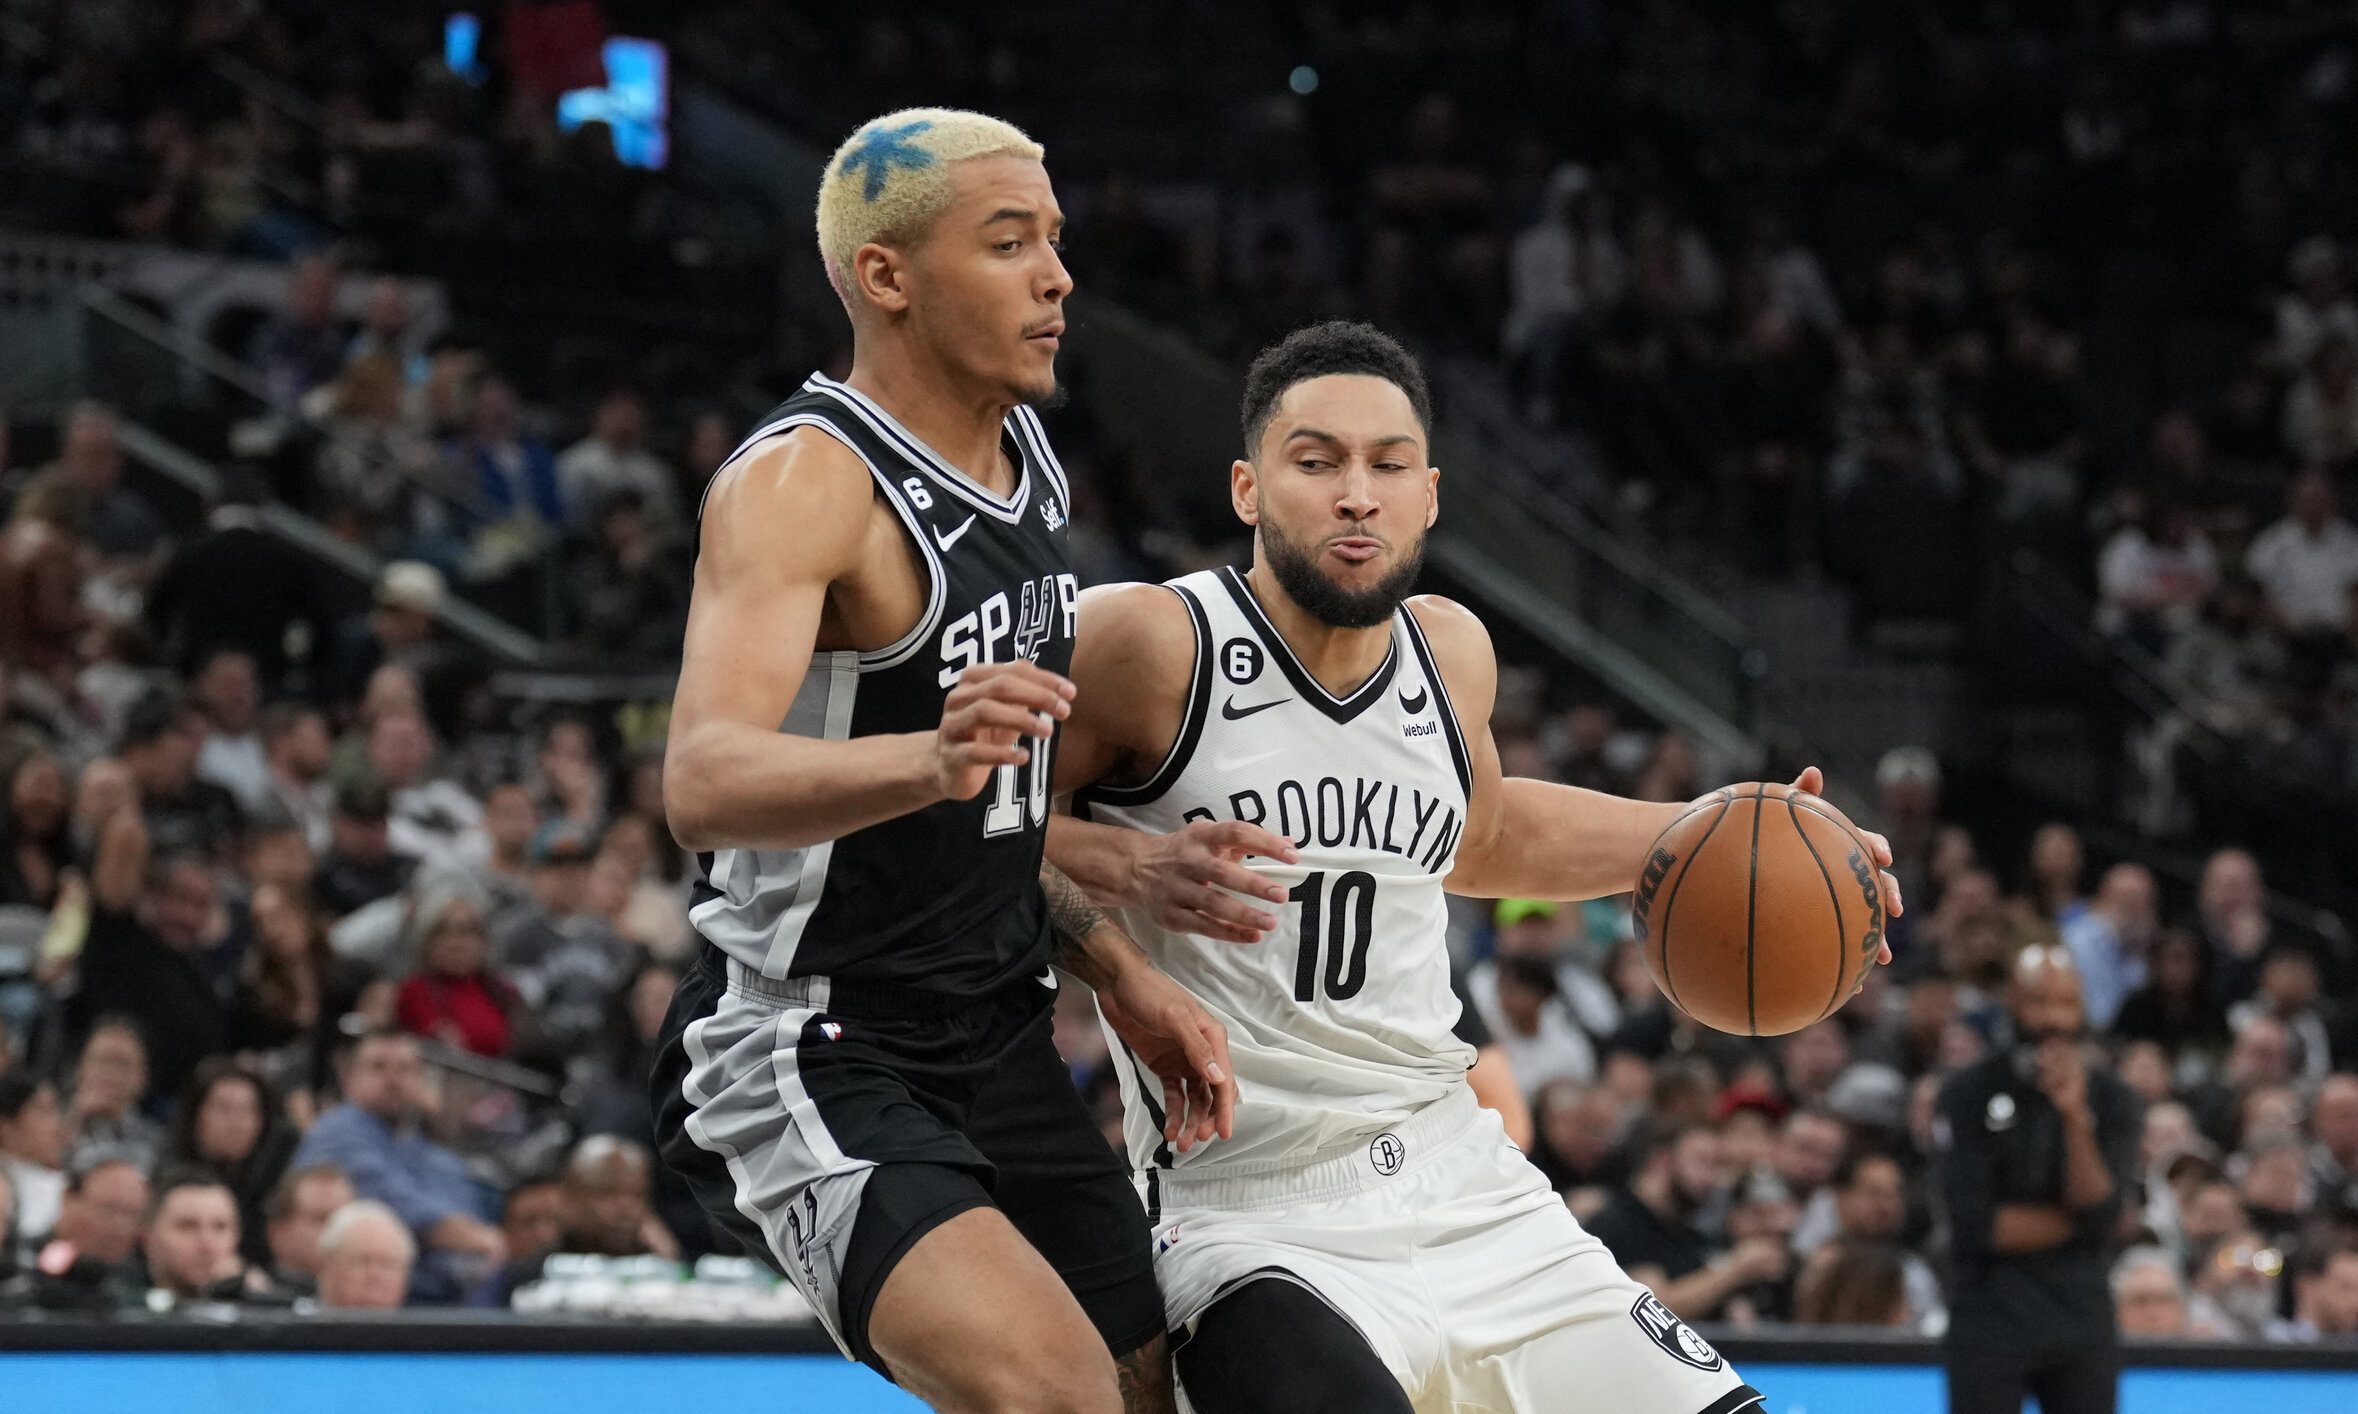 Spurs top shorthanded Nets, snap 5-game skid